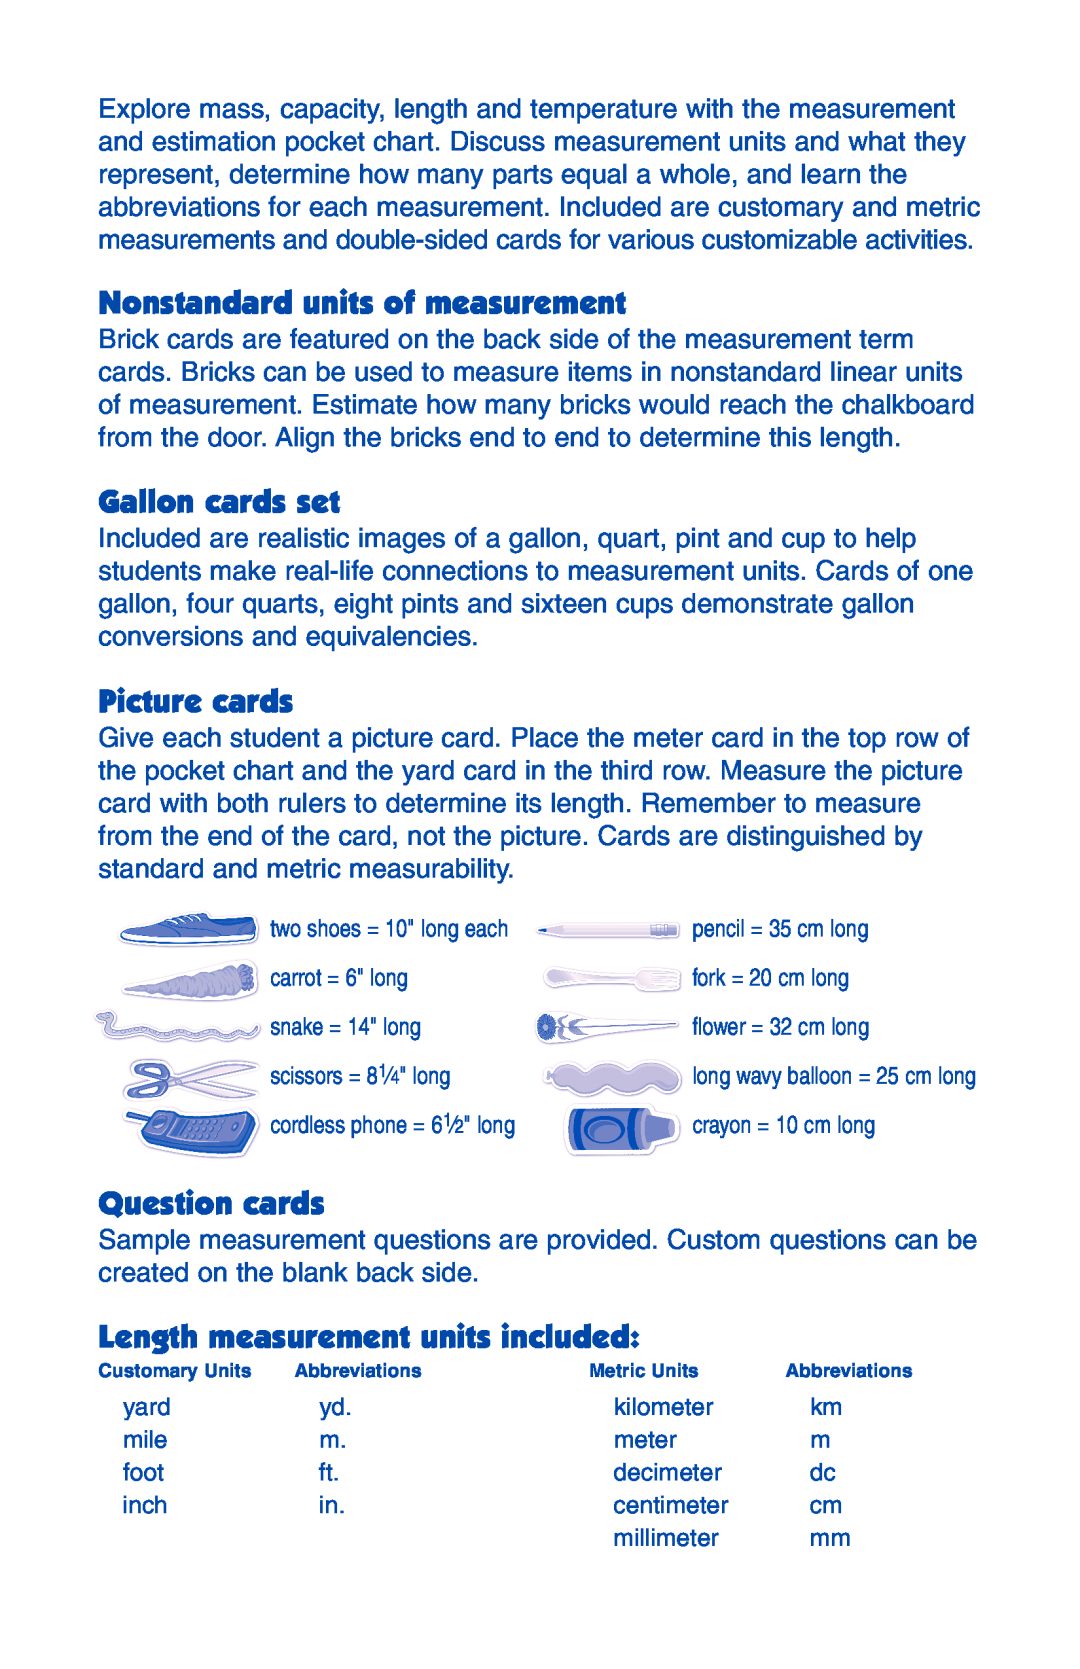 Learning Resources 2284 manual Nonstandard units of measurement, Gallon cards set, Picture cards, Question cards 